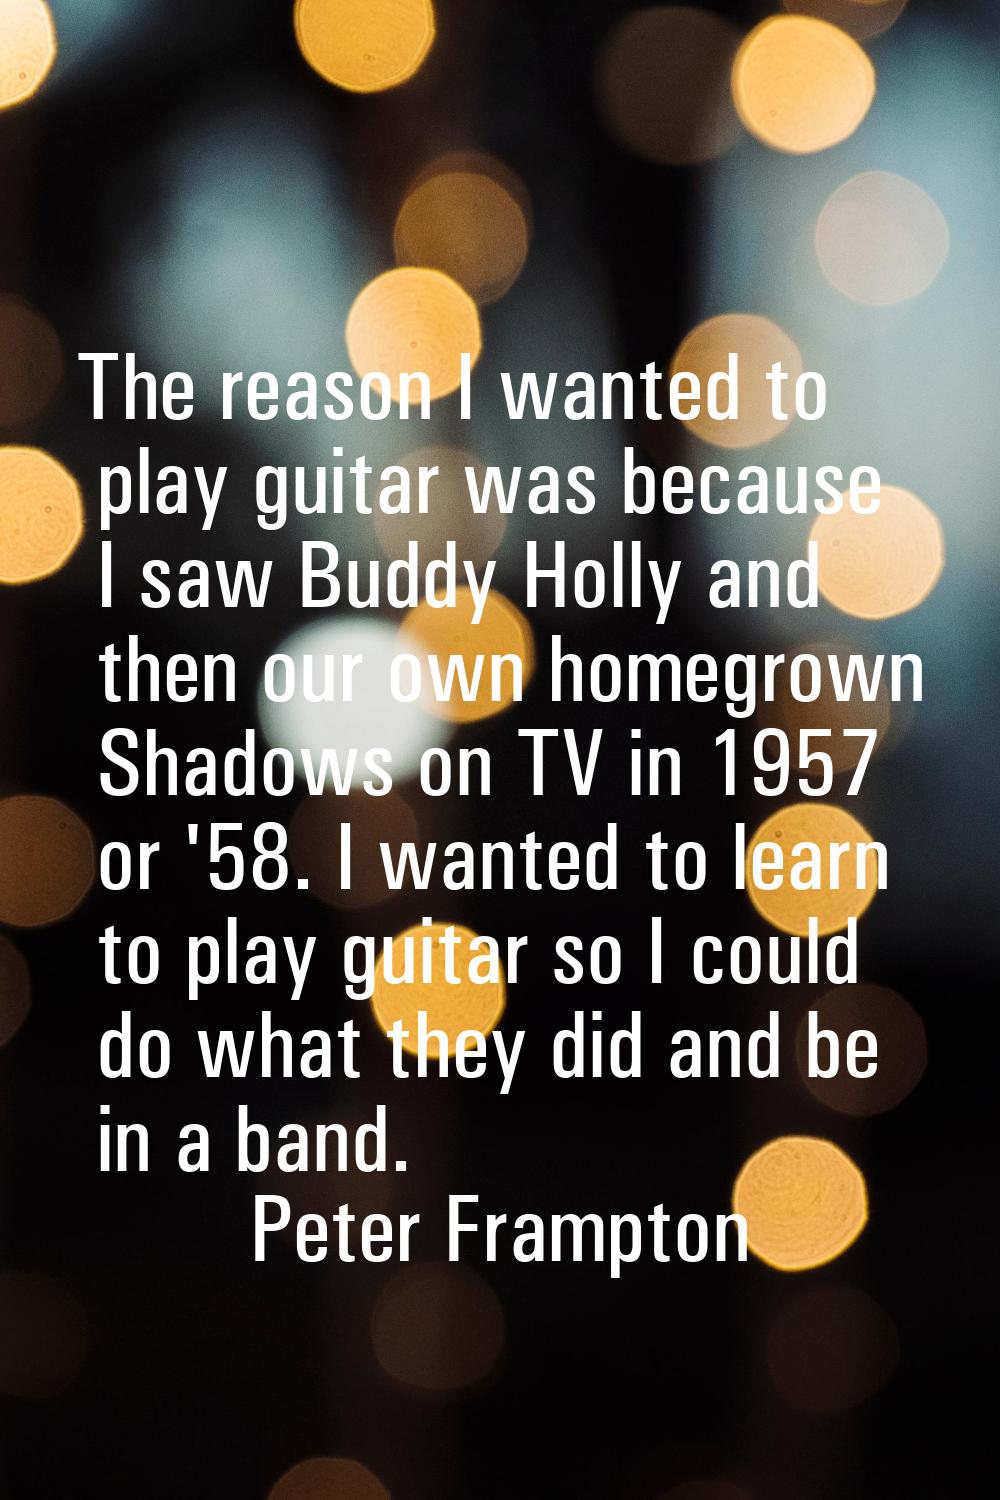 The reason I wanted to play guitar was because I saw Buddy Holly and then our own homegrown Shadows